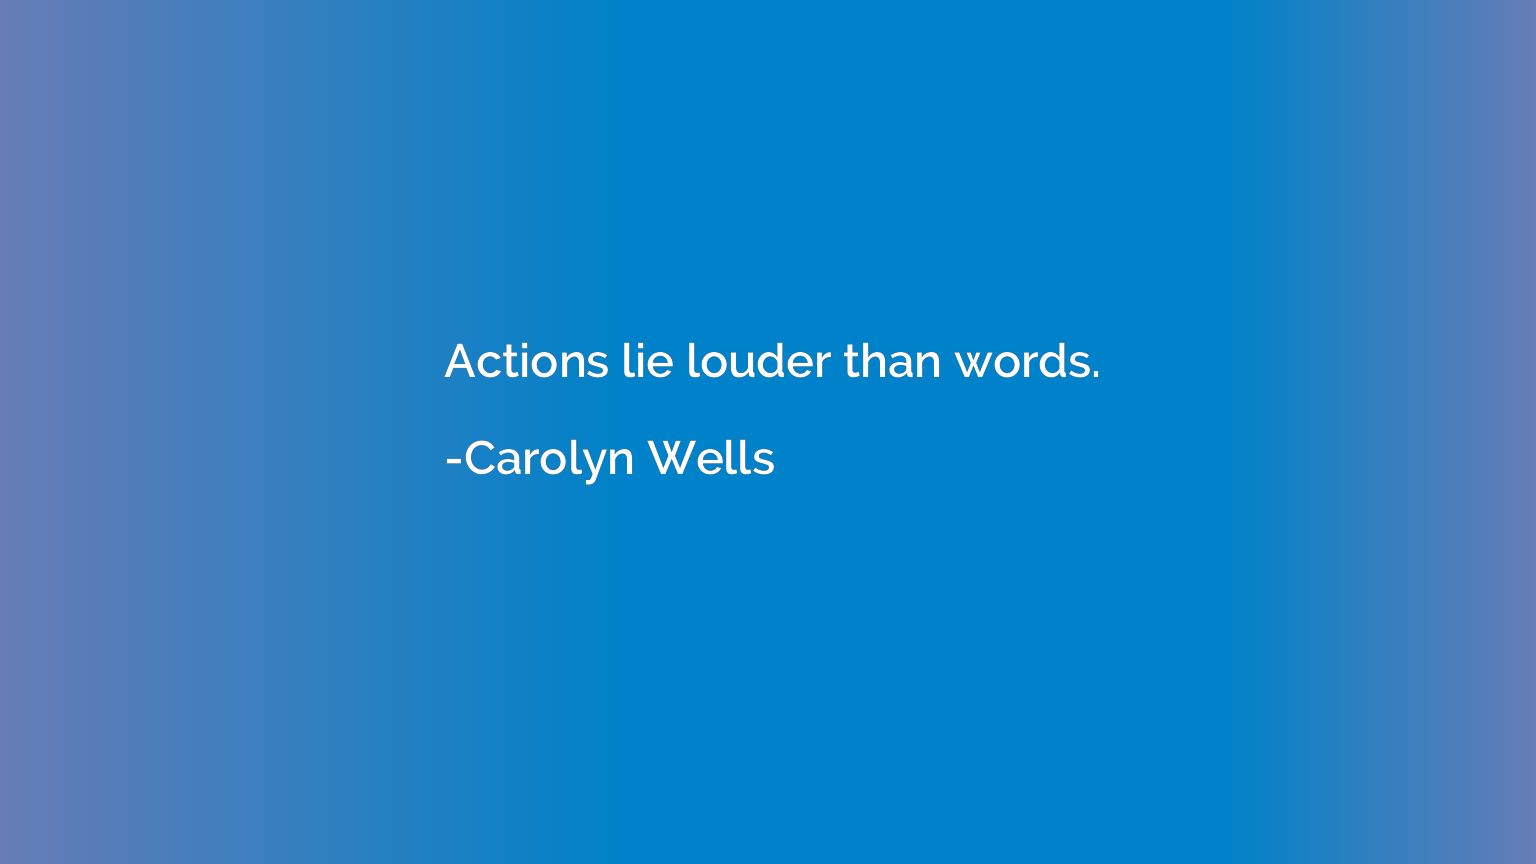 Actions lie louder than words.